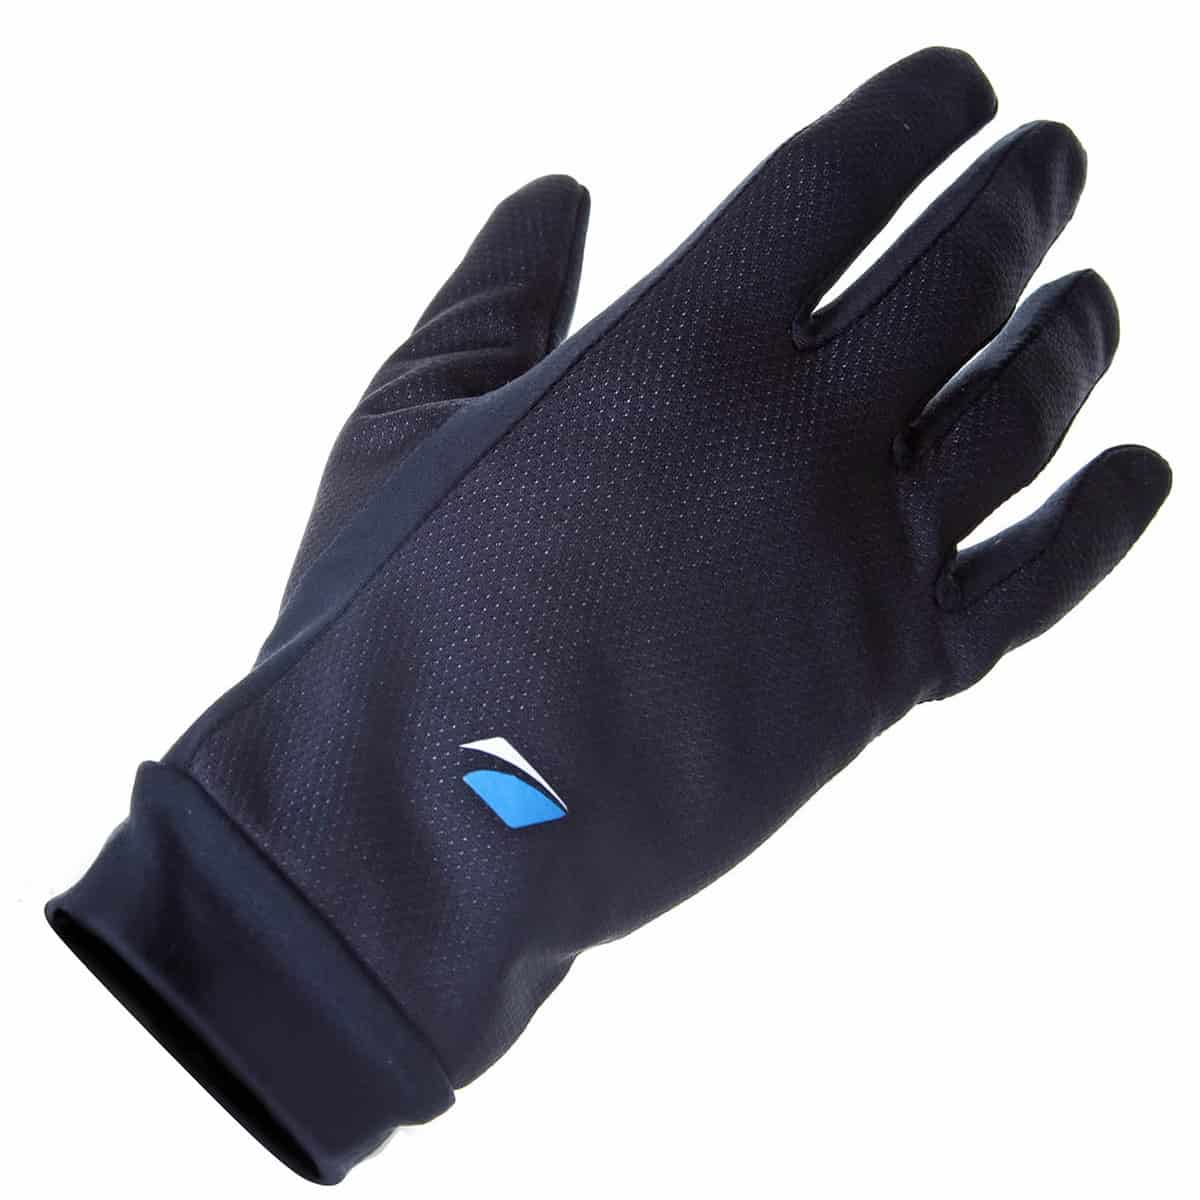 Windproof & thermal glove liners